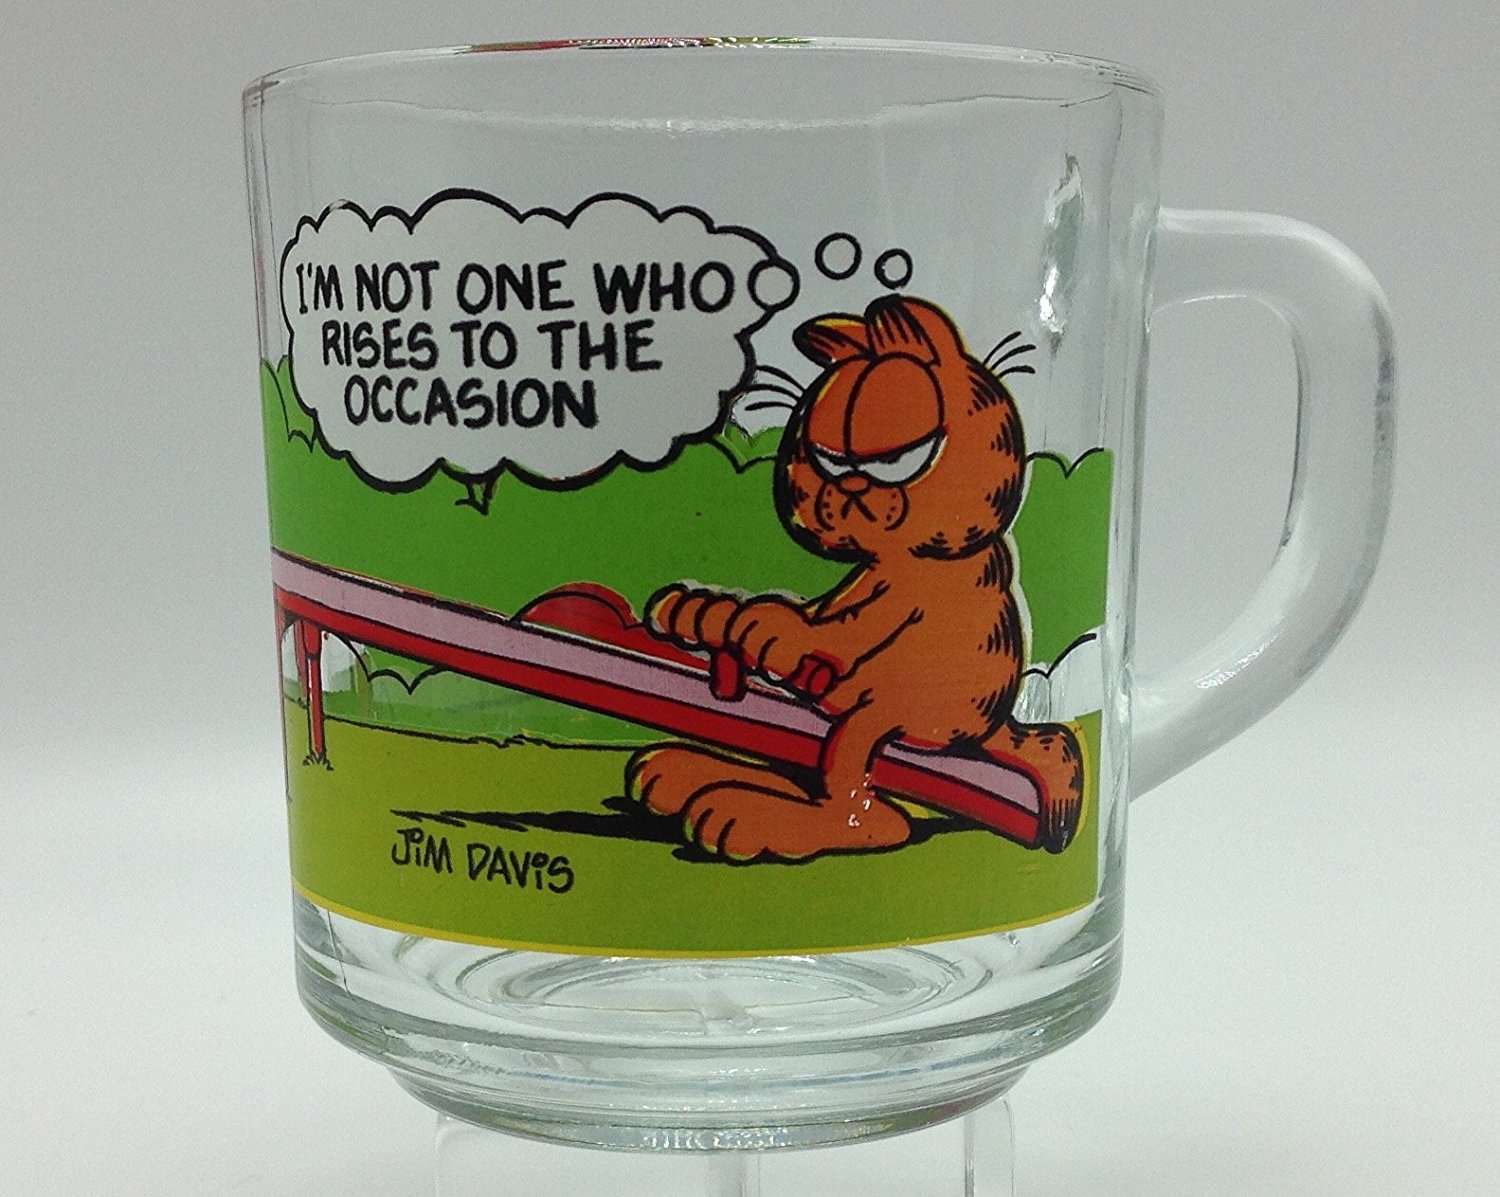 If you never got your Garfield McDonald's cup it's not to late.  <br/><br/> You can pick this up at  <a href="https://amzn.to/2GZIHsy">Amazon for about $7.50</a>.